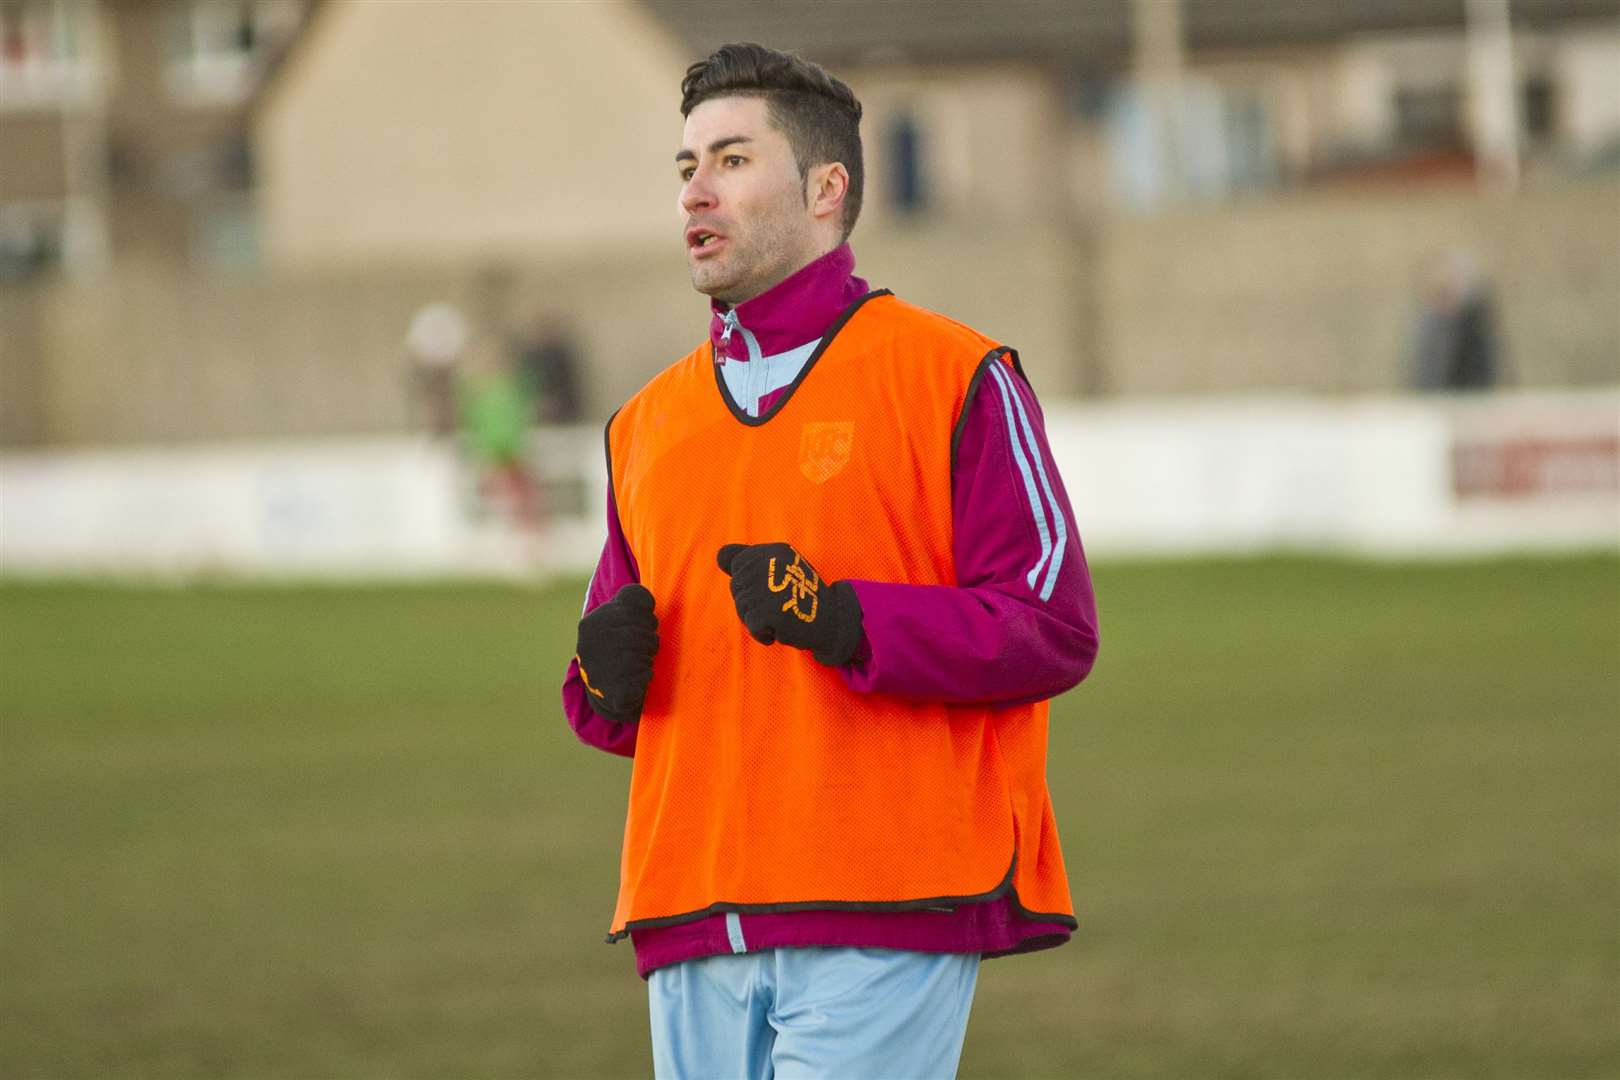 Keith skipper Cammy Keith scored four times in the 7-1 thrashing of Strathspey Thistle.